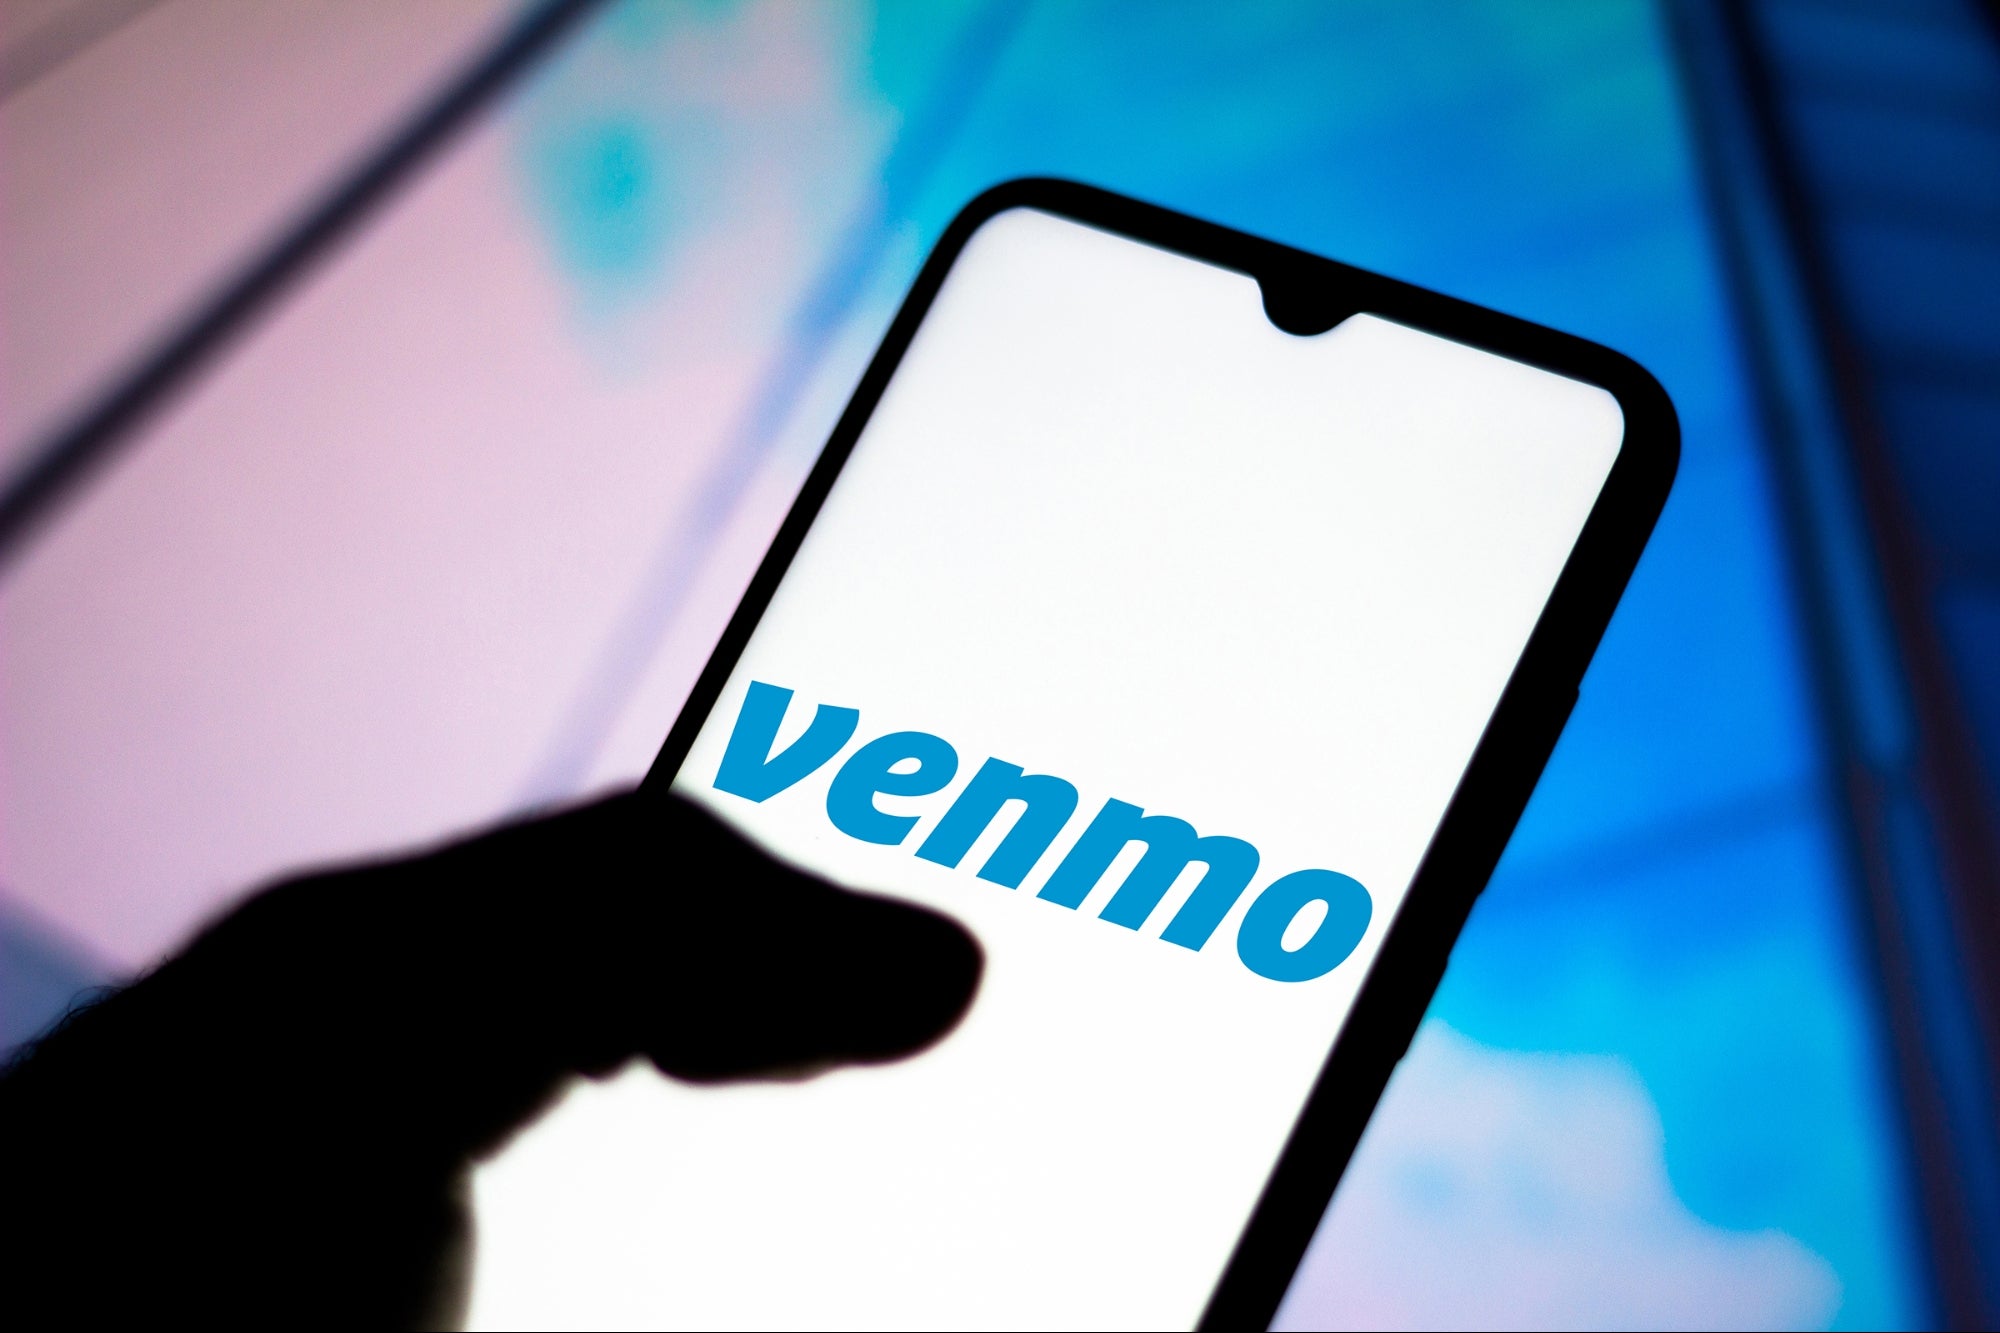 Venmo - Share Payments: How to transfer, receive money